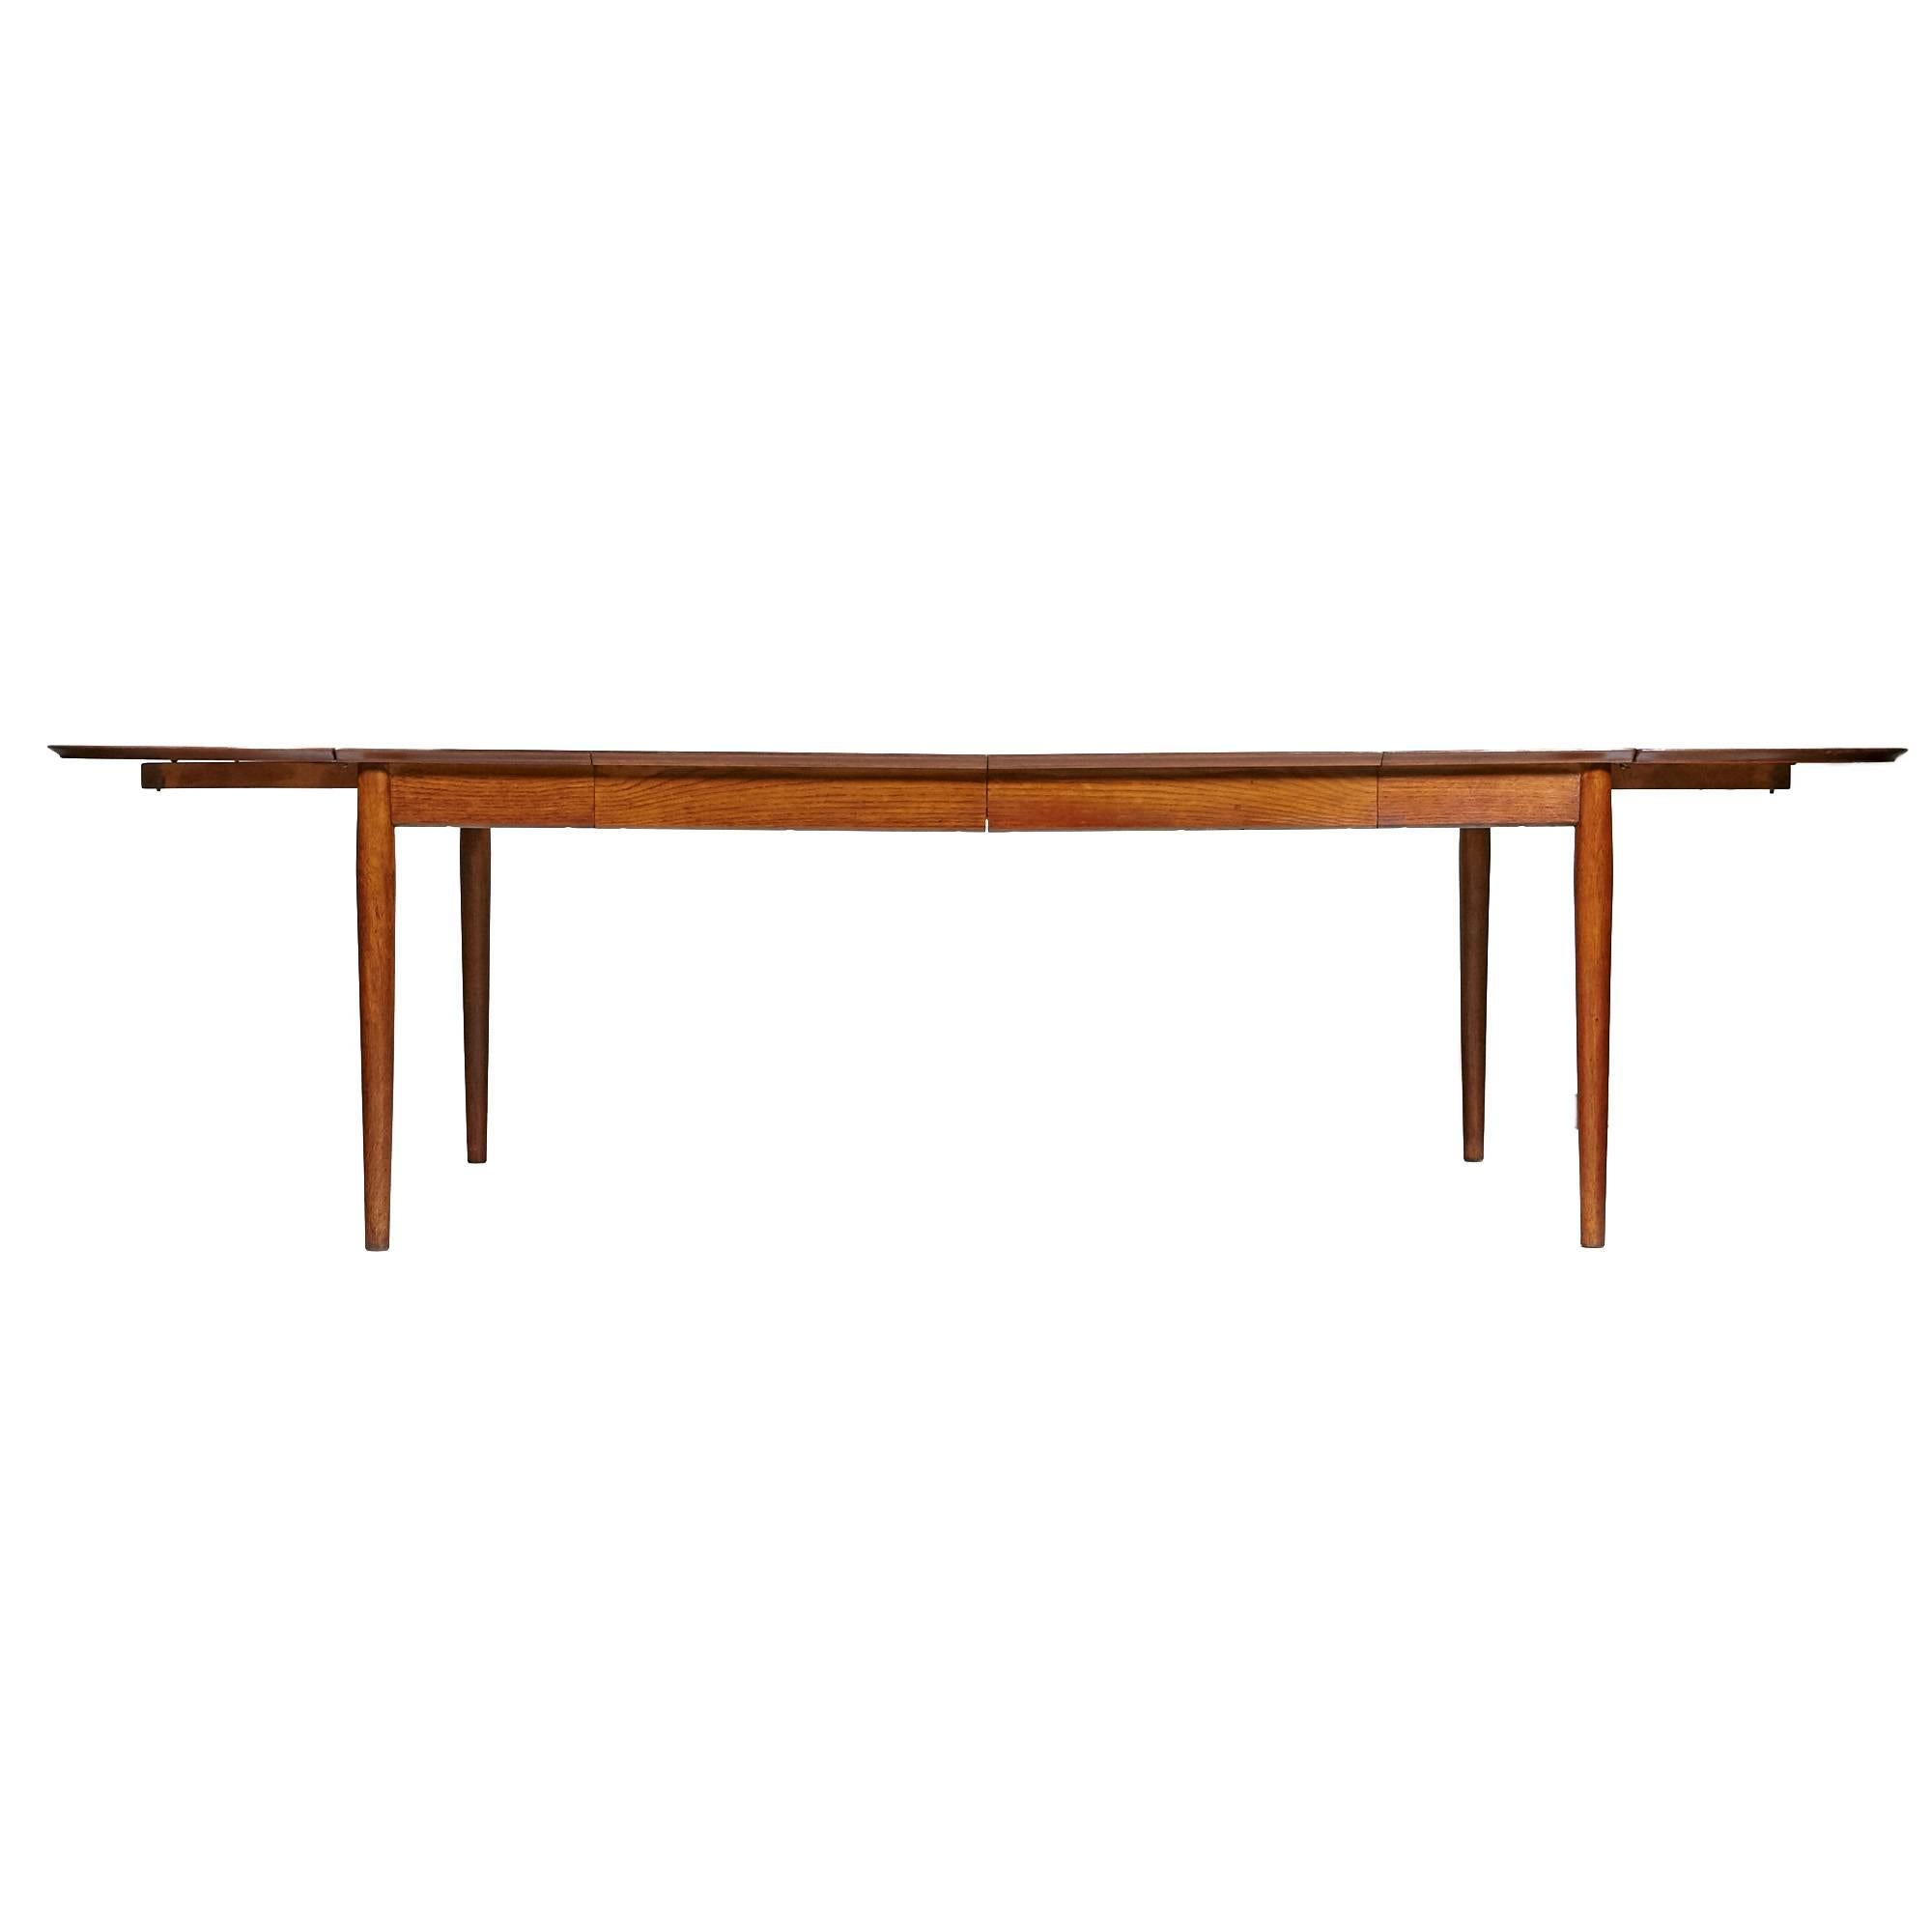 Danish 1950s Arne Vodder designed for the George Tanier Selection teak extension dining table manufactured by Sibast Mobler. The table features two rounded removable drop-leaves with two additional insert leaves, a banded edge and round tapered